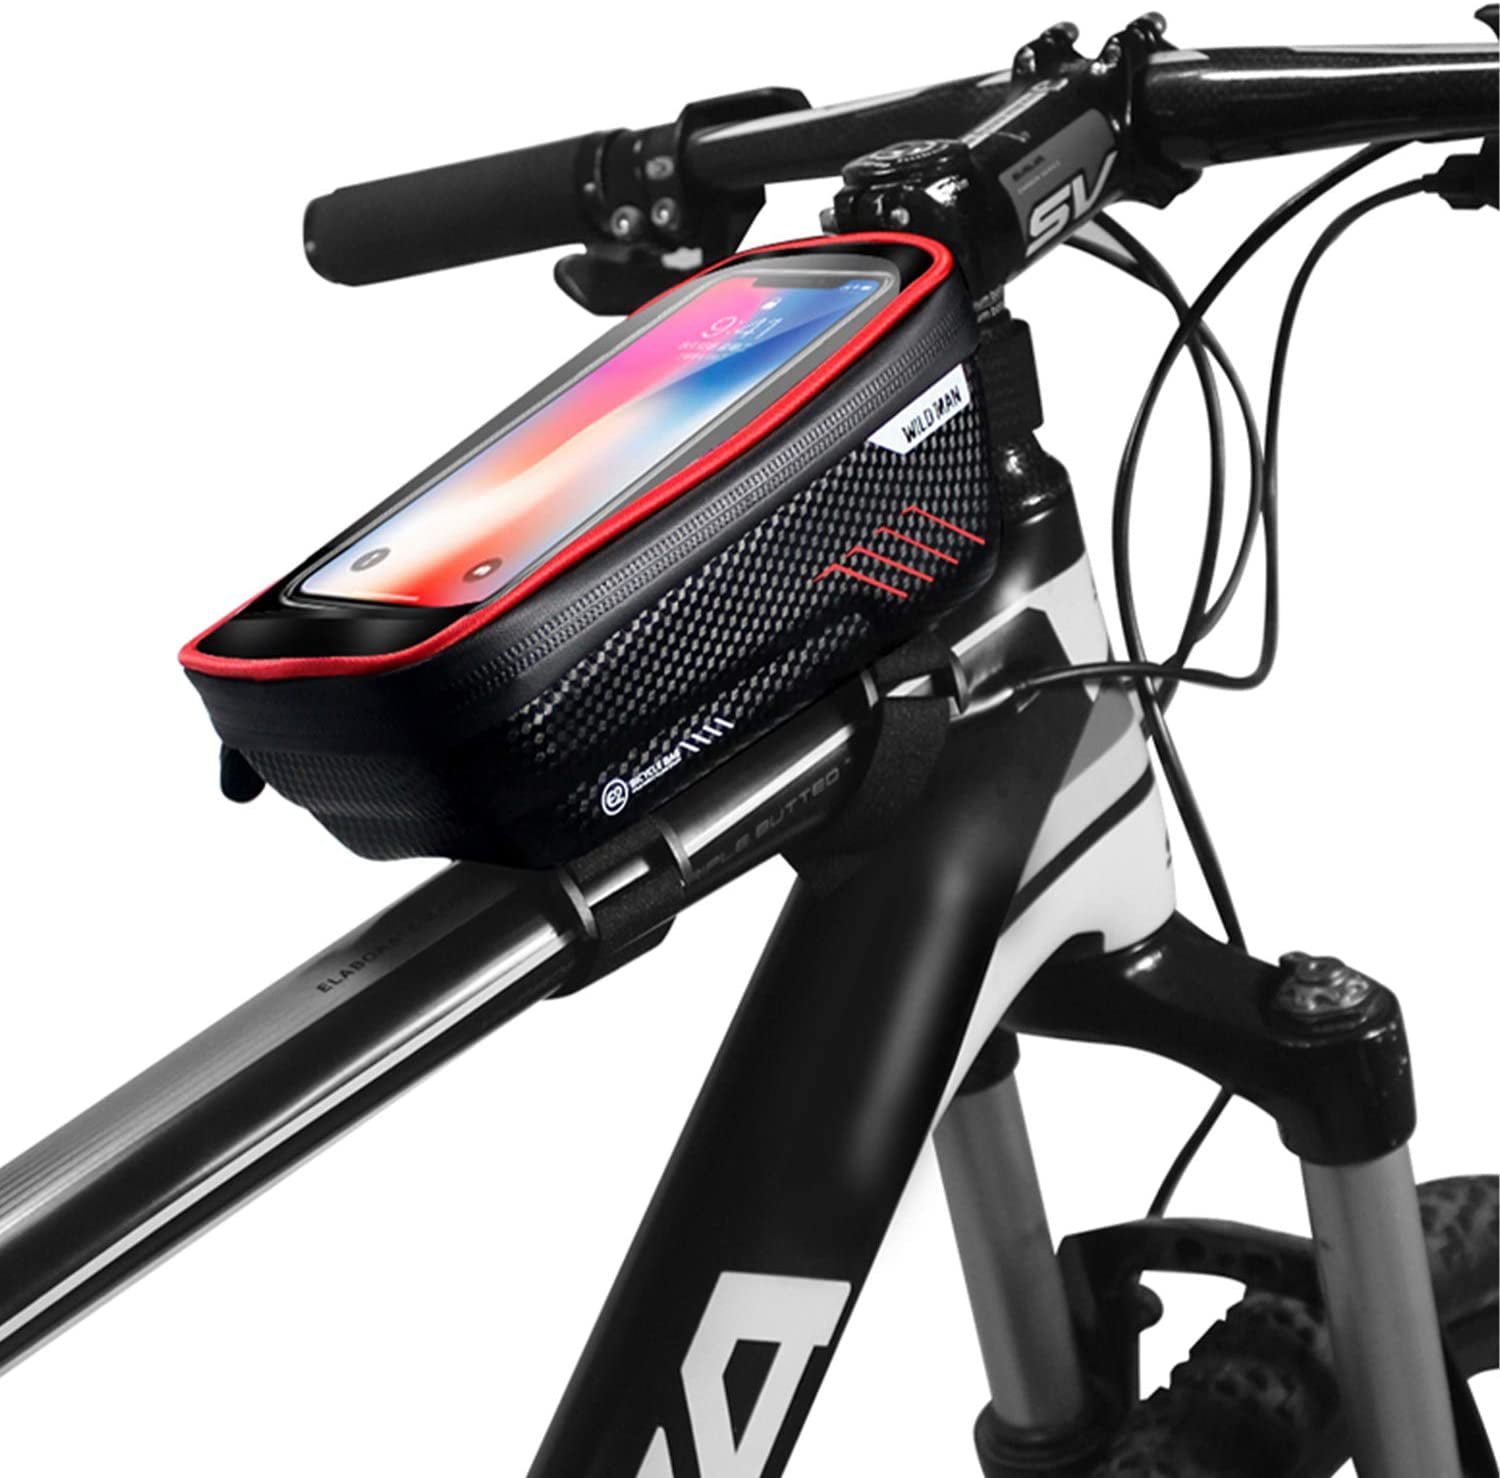 6.5 inch Touchscreen Cycling Cellphone Mount Pannier Accessories for iPhone 12 Pro Max Sireck Phone Holder Bike Bag Huawei Waterproof Top Tube Bicycle Frame Bag 